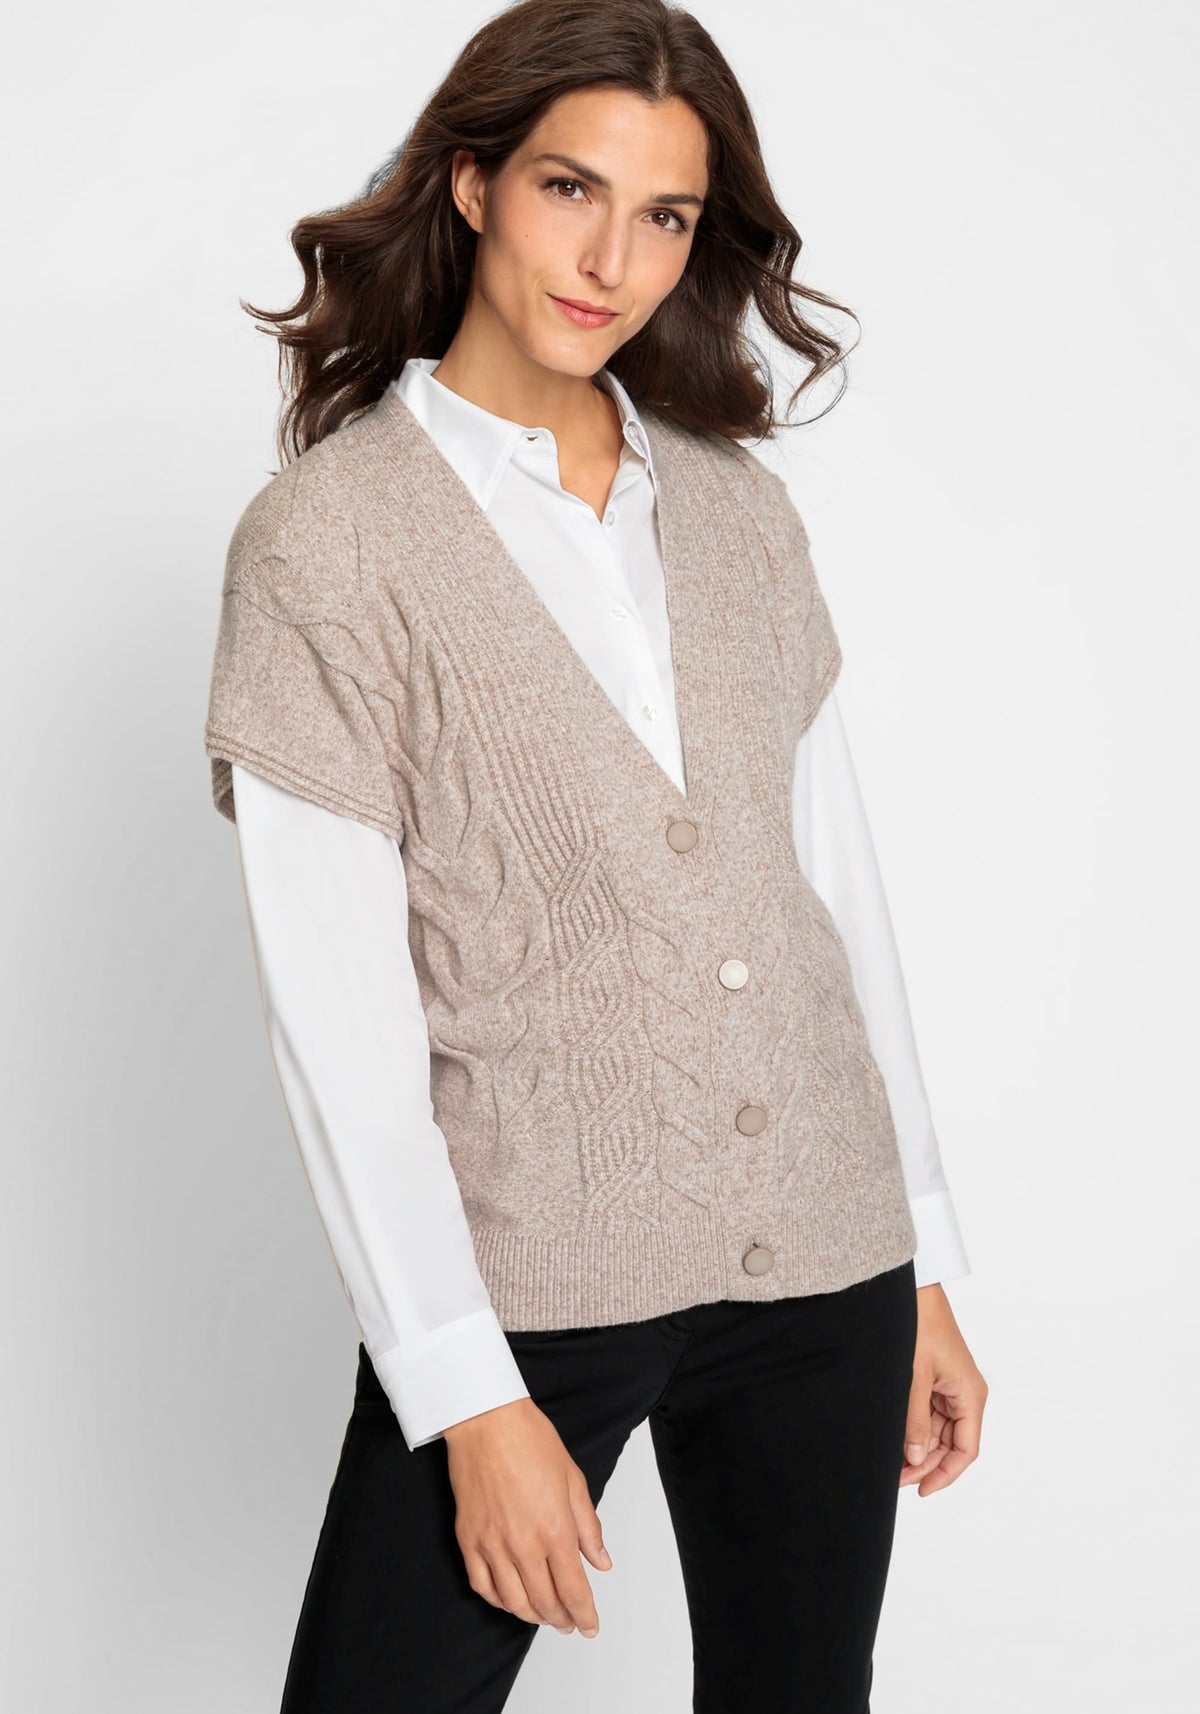 Short Sleeve Cable Cardigan